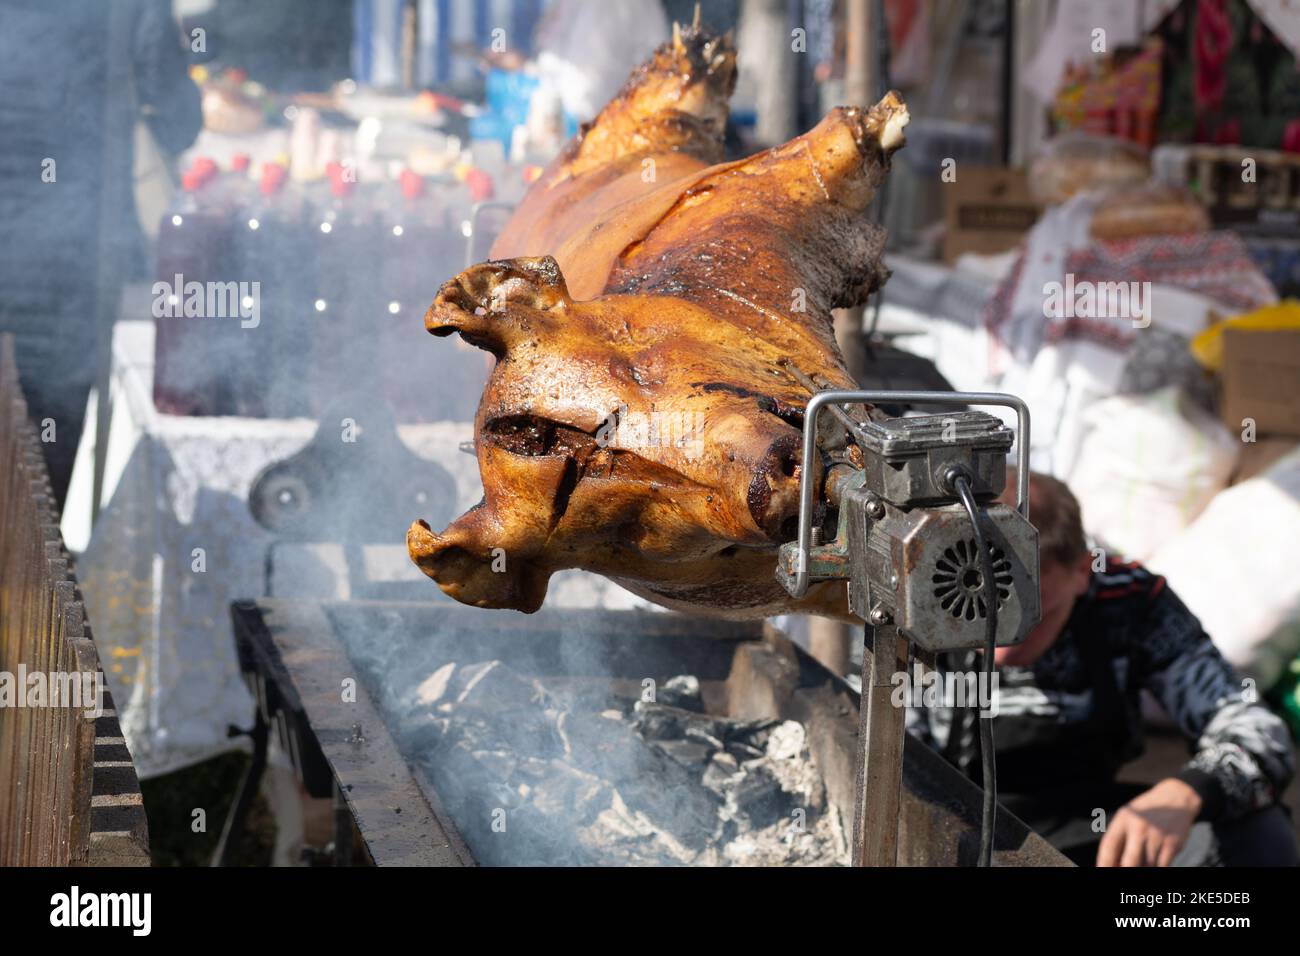 Piglet on a spit. Grilled pig at the street food festival. Roasted pig on the rack. Food. Stock Photo